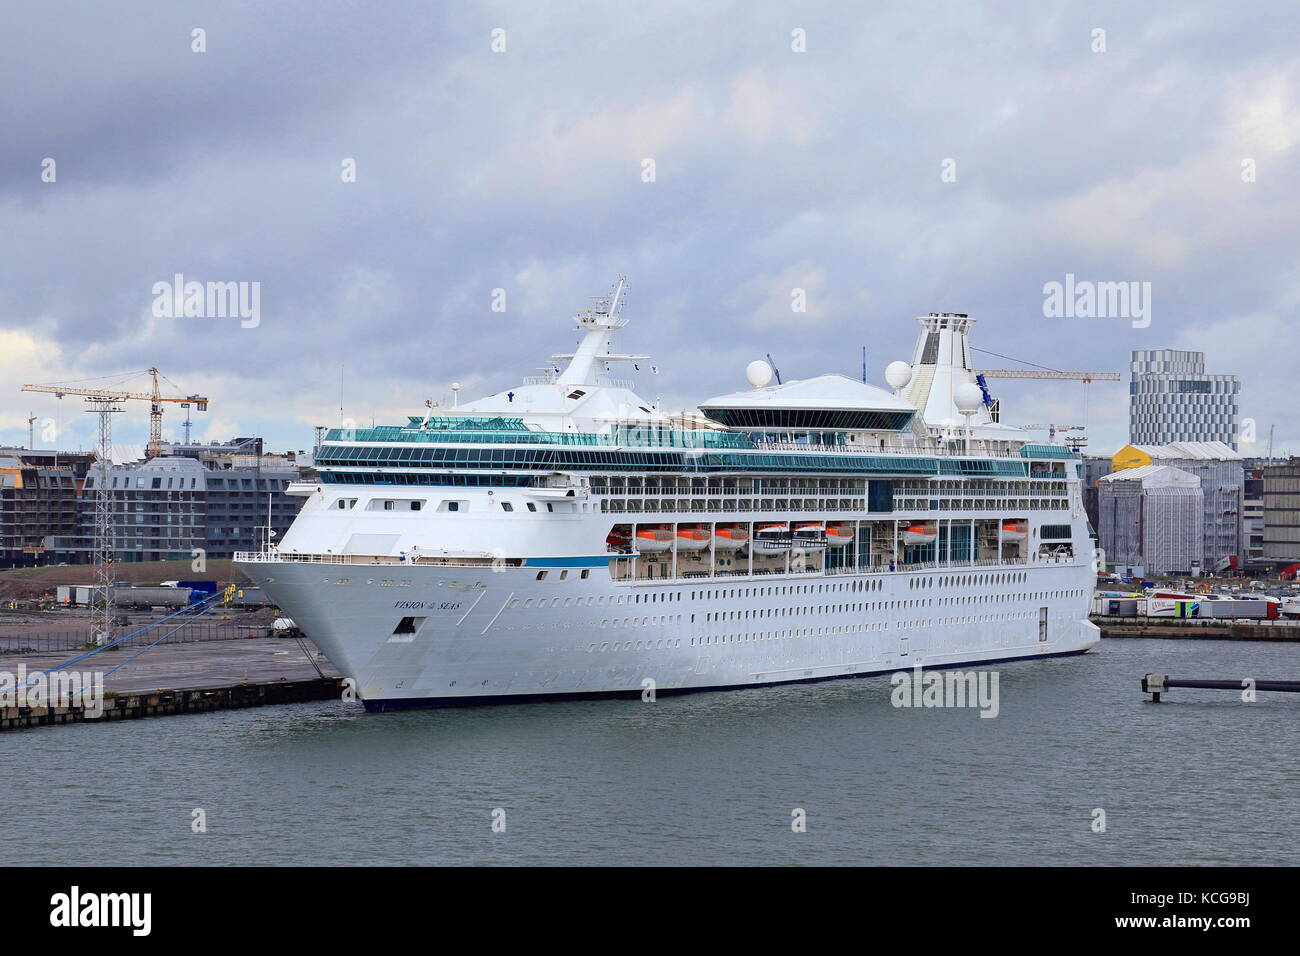 MS Vision of the Seas cruise ship in the harbour of Helsinki, Finland Stock  Photo - Alamy